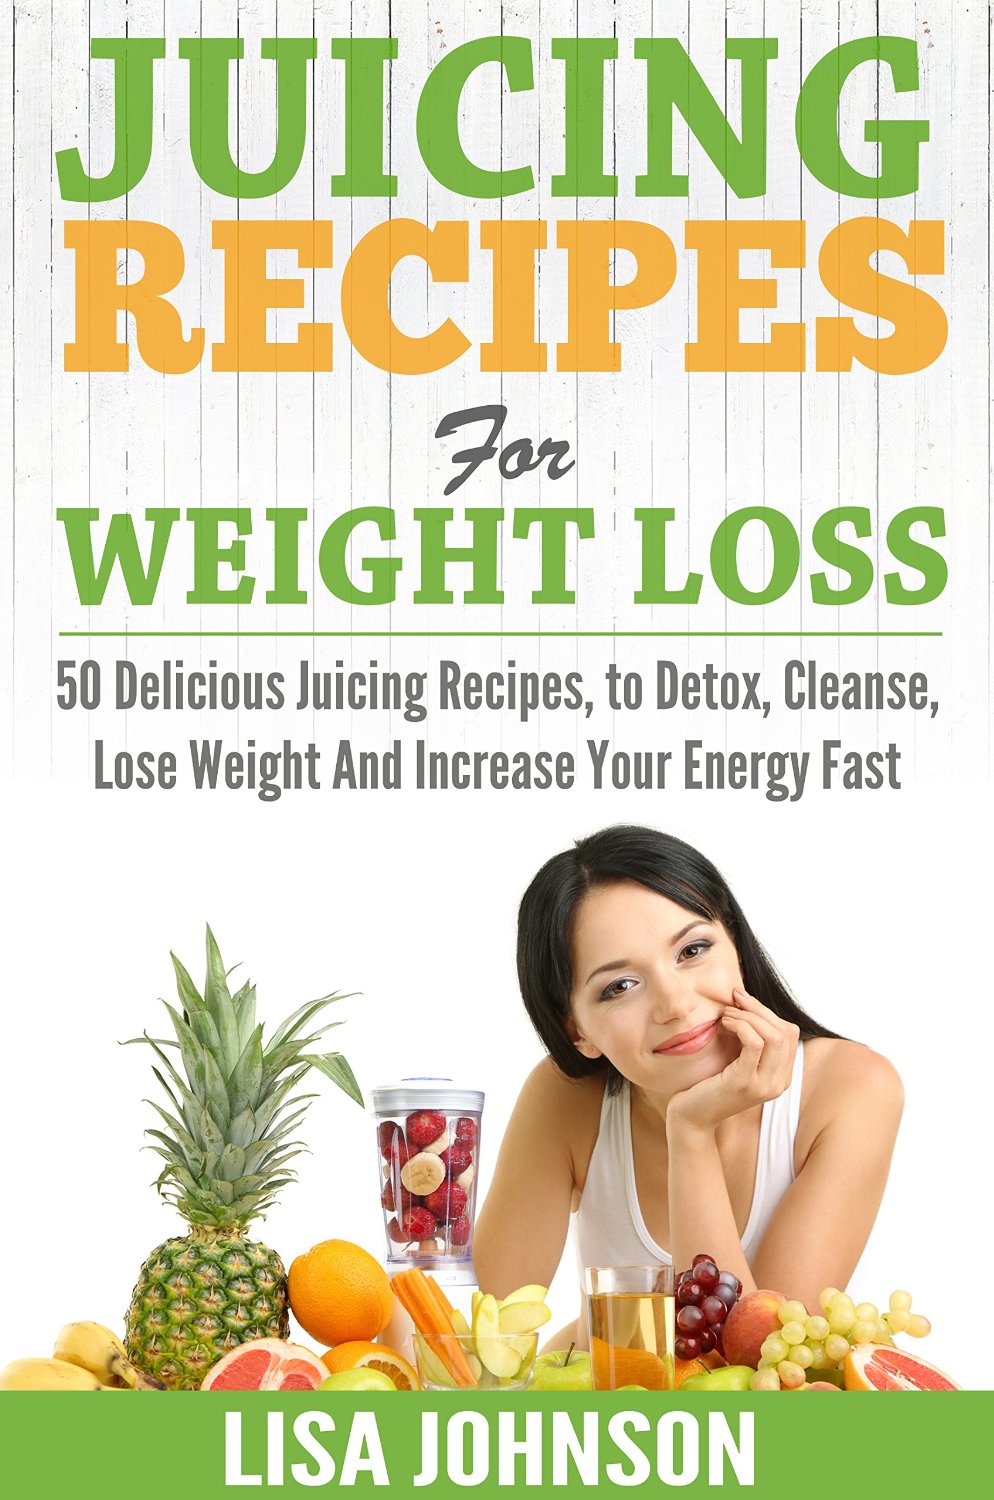 Juicing Recipes for Weight Loss: 50 Delicious Juicing Recipes to Detox, Cleanse, Lose Weight and Increase Your Energy Fast by Lisa Johnson